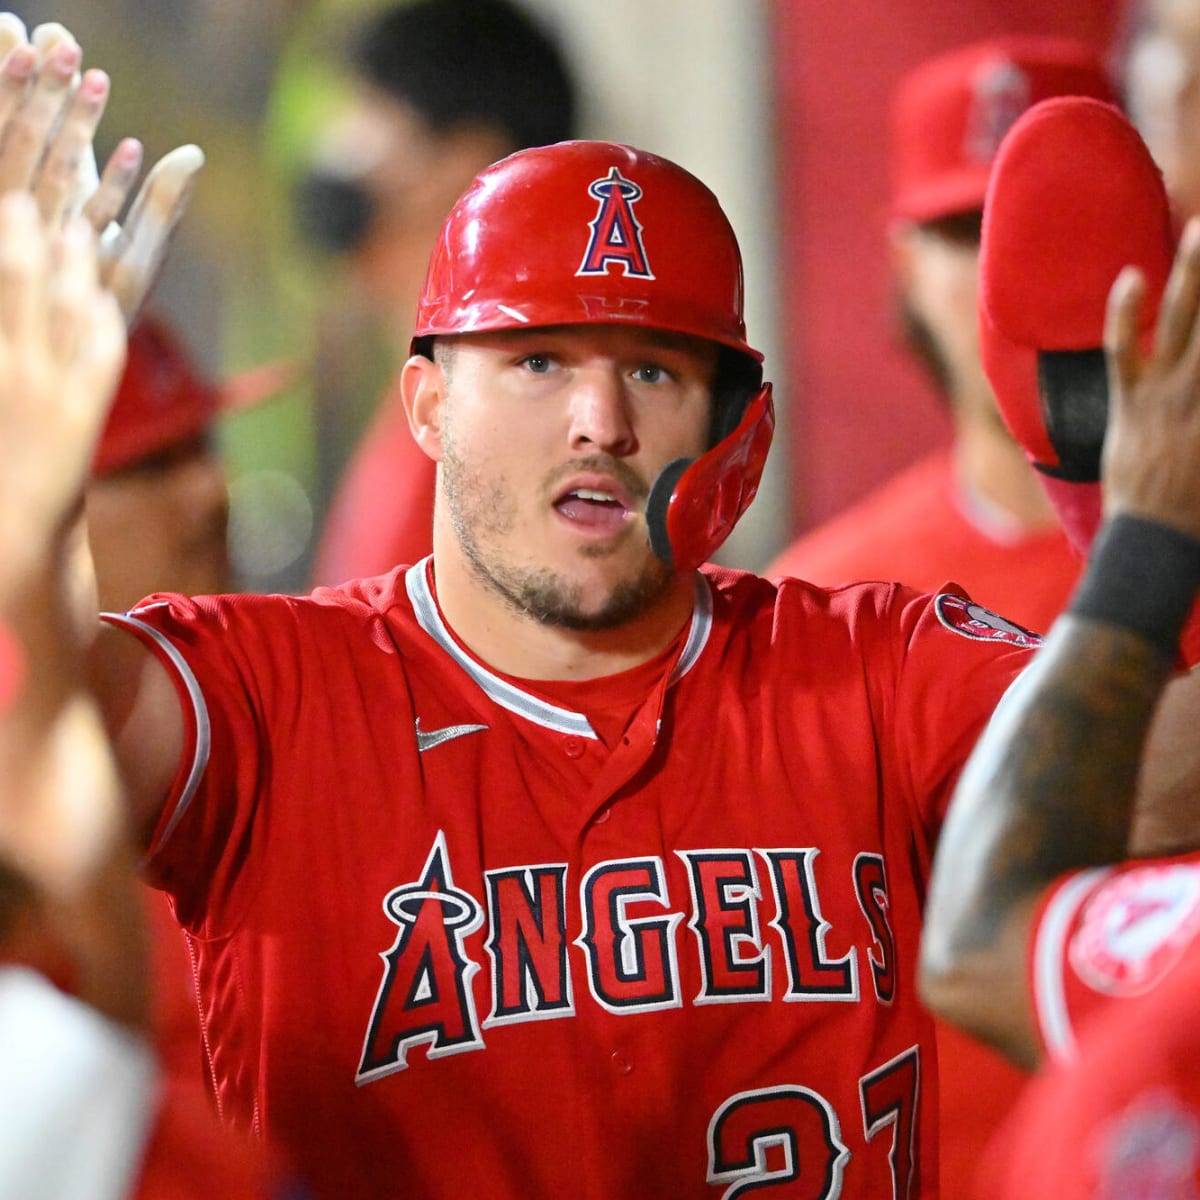 Mike Trout eager to lead Team USA repeat bid at World Baseball Classic  National News - Bally Sports